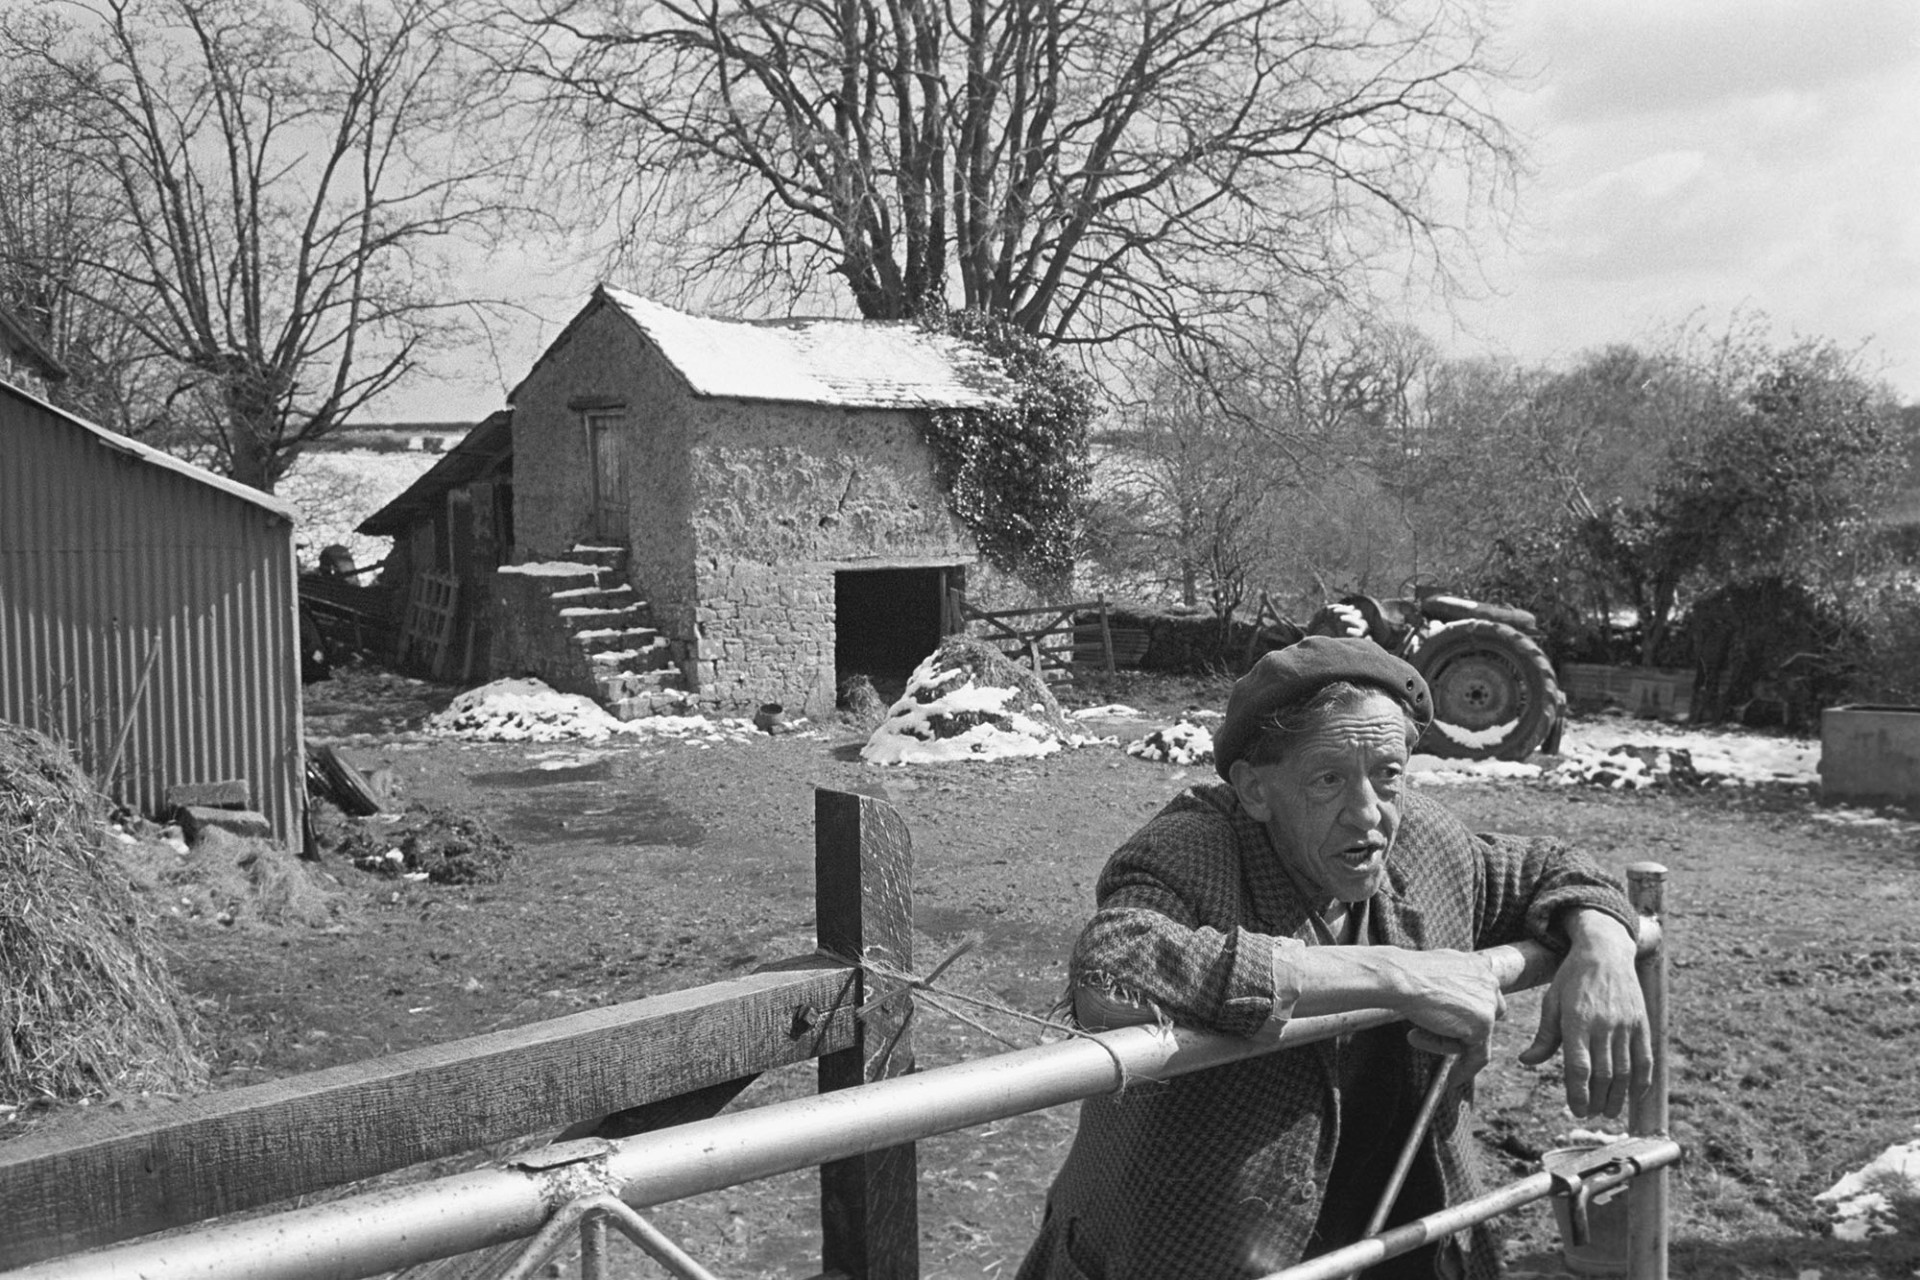 Farmer leaning over gate in farmyard, barn in background.
[Bill Cooke leaning over a gate in a farmyard. A corrugated iron barn, cob granary and muckheaps covered in snow are visible in the background, at Colehouse in Riddlecombe.]